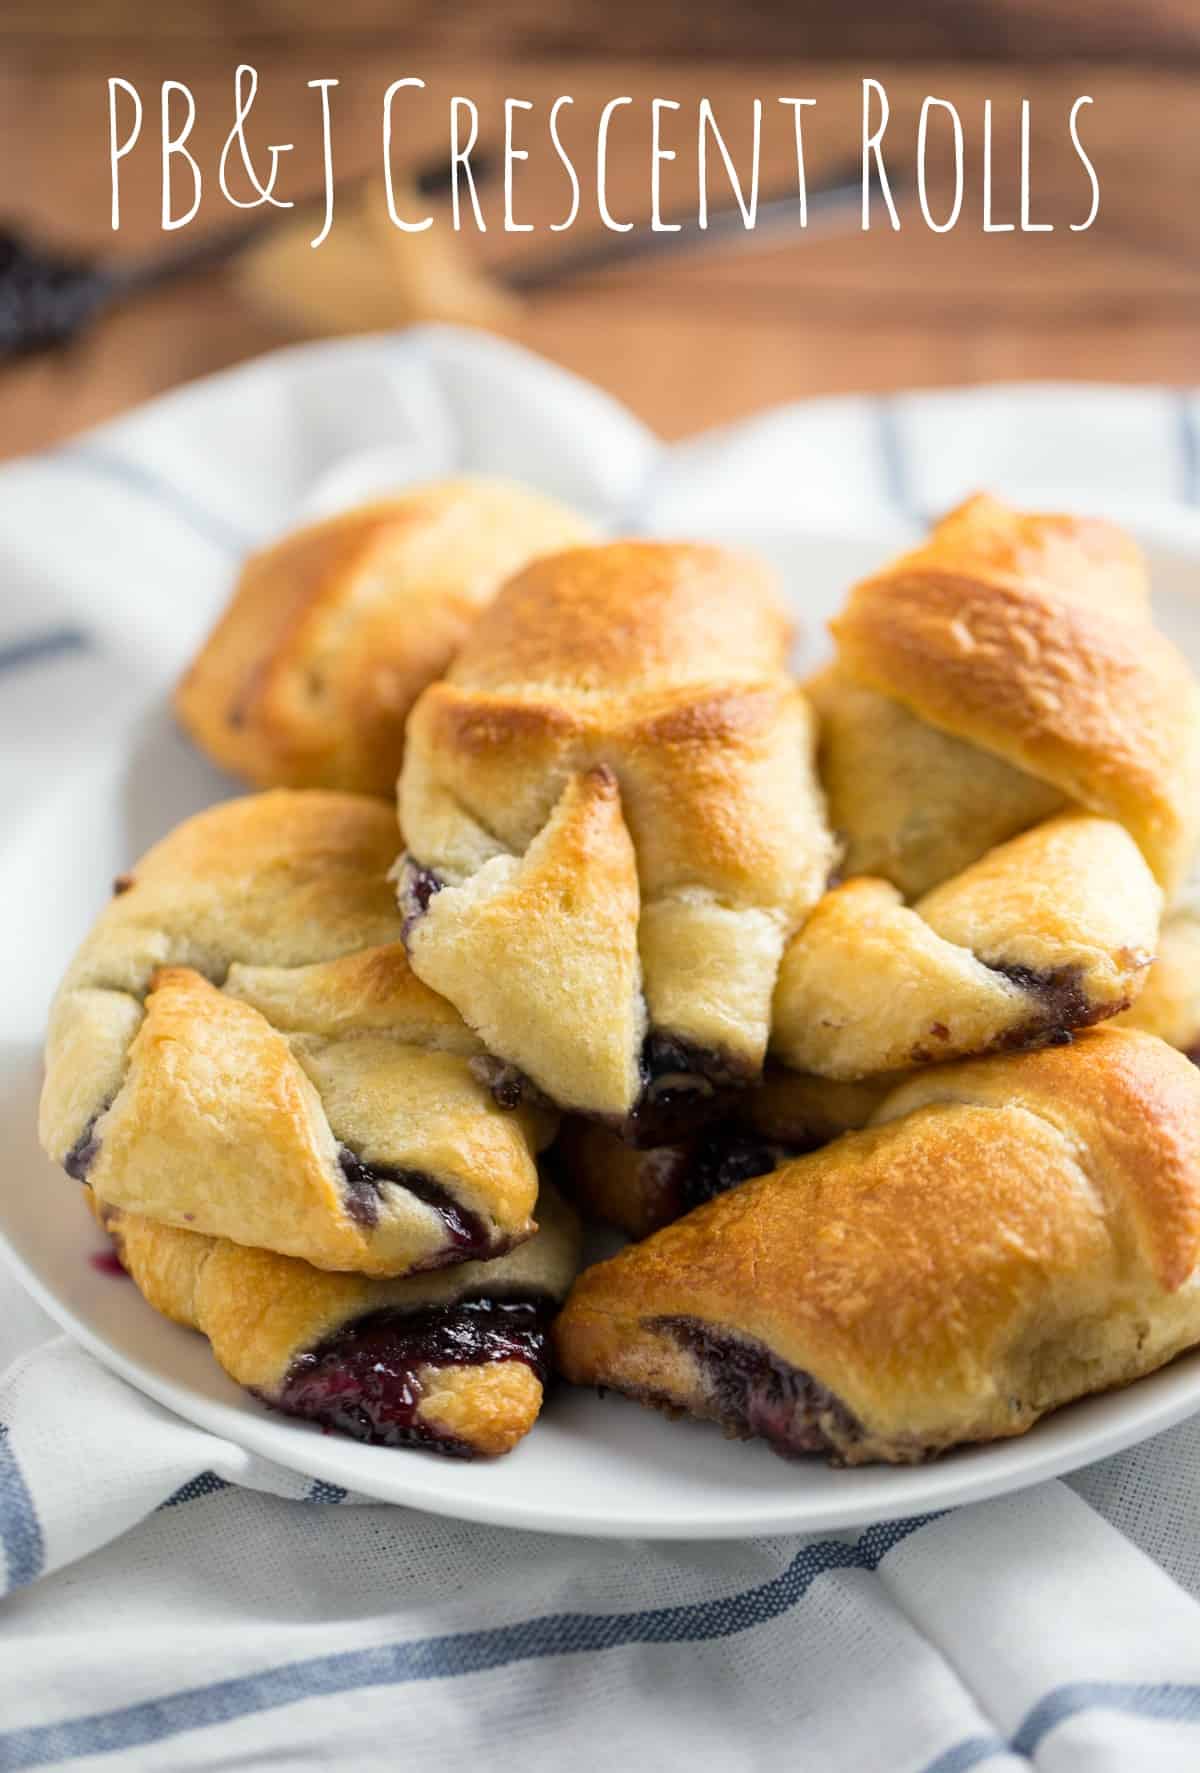 This jelly roll recipe includes an upgrade over the standard PB&J sandwich - you use crescent rolls as a buttery, flakey replacement for regular bread. 